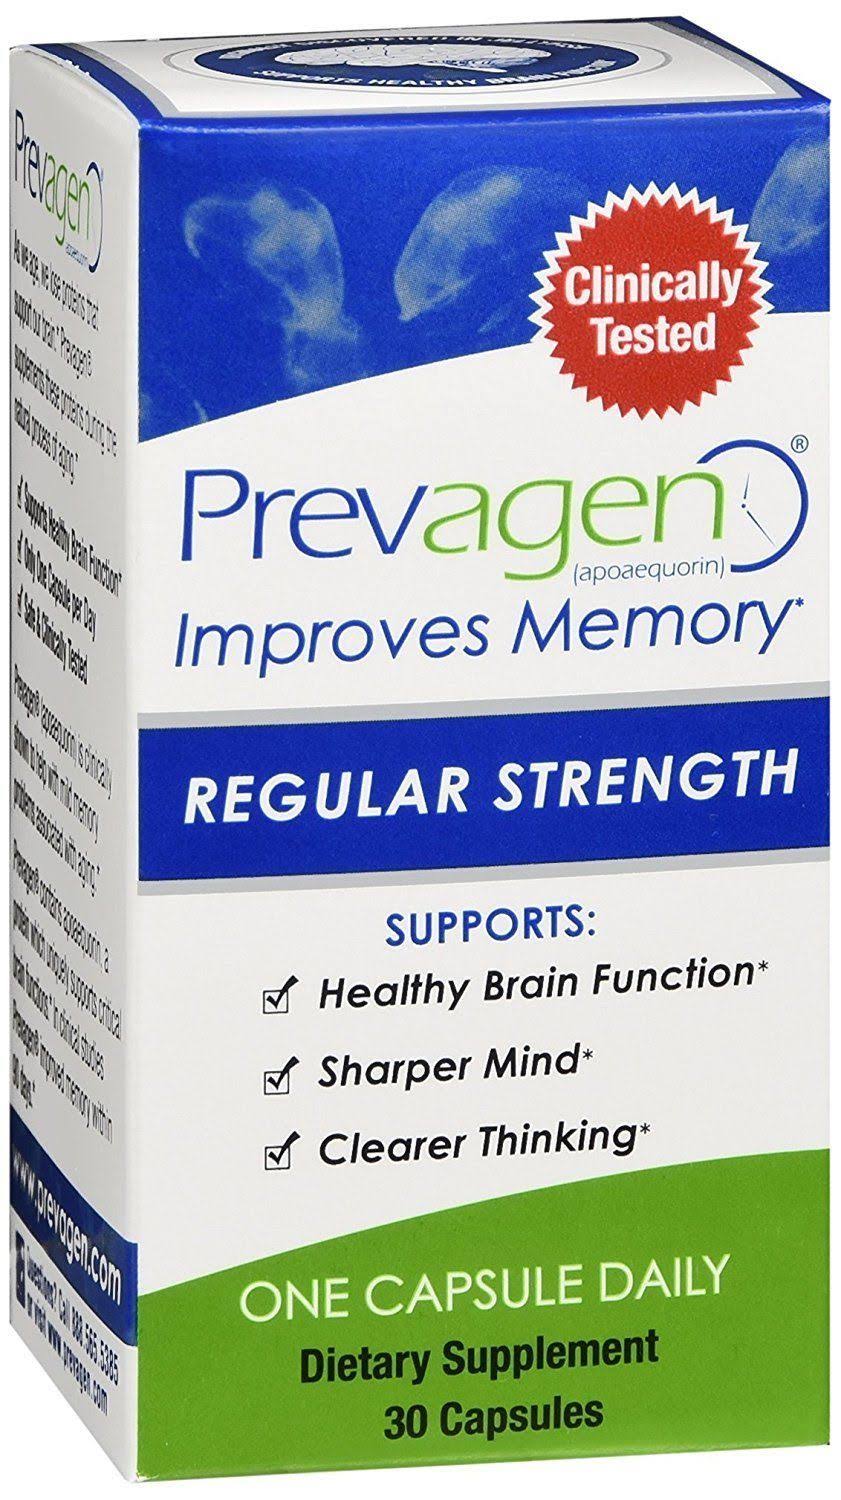 Prevagen Brain Cell Protection Dietary Supplement - 30 Capsules